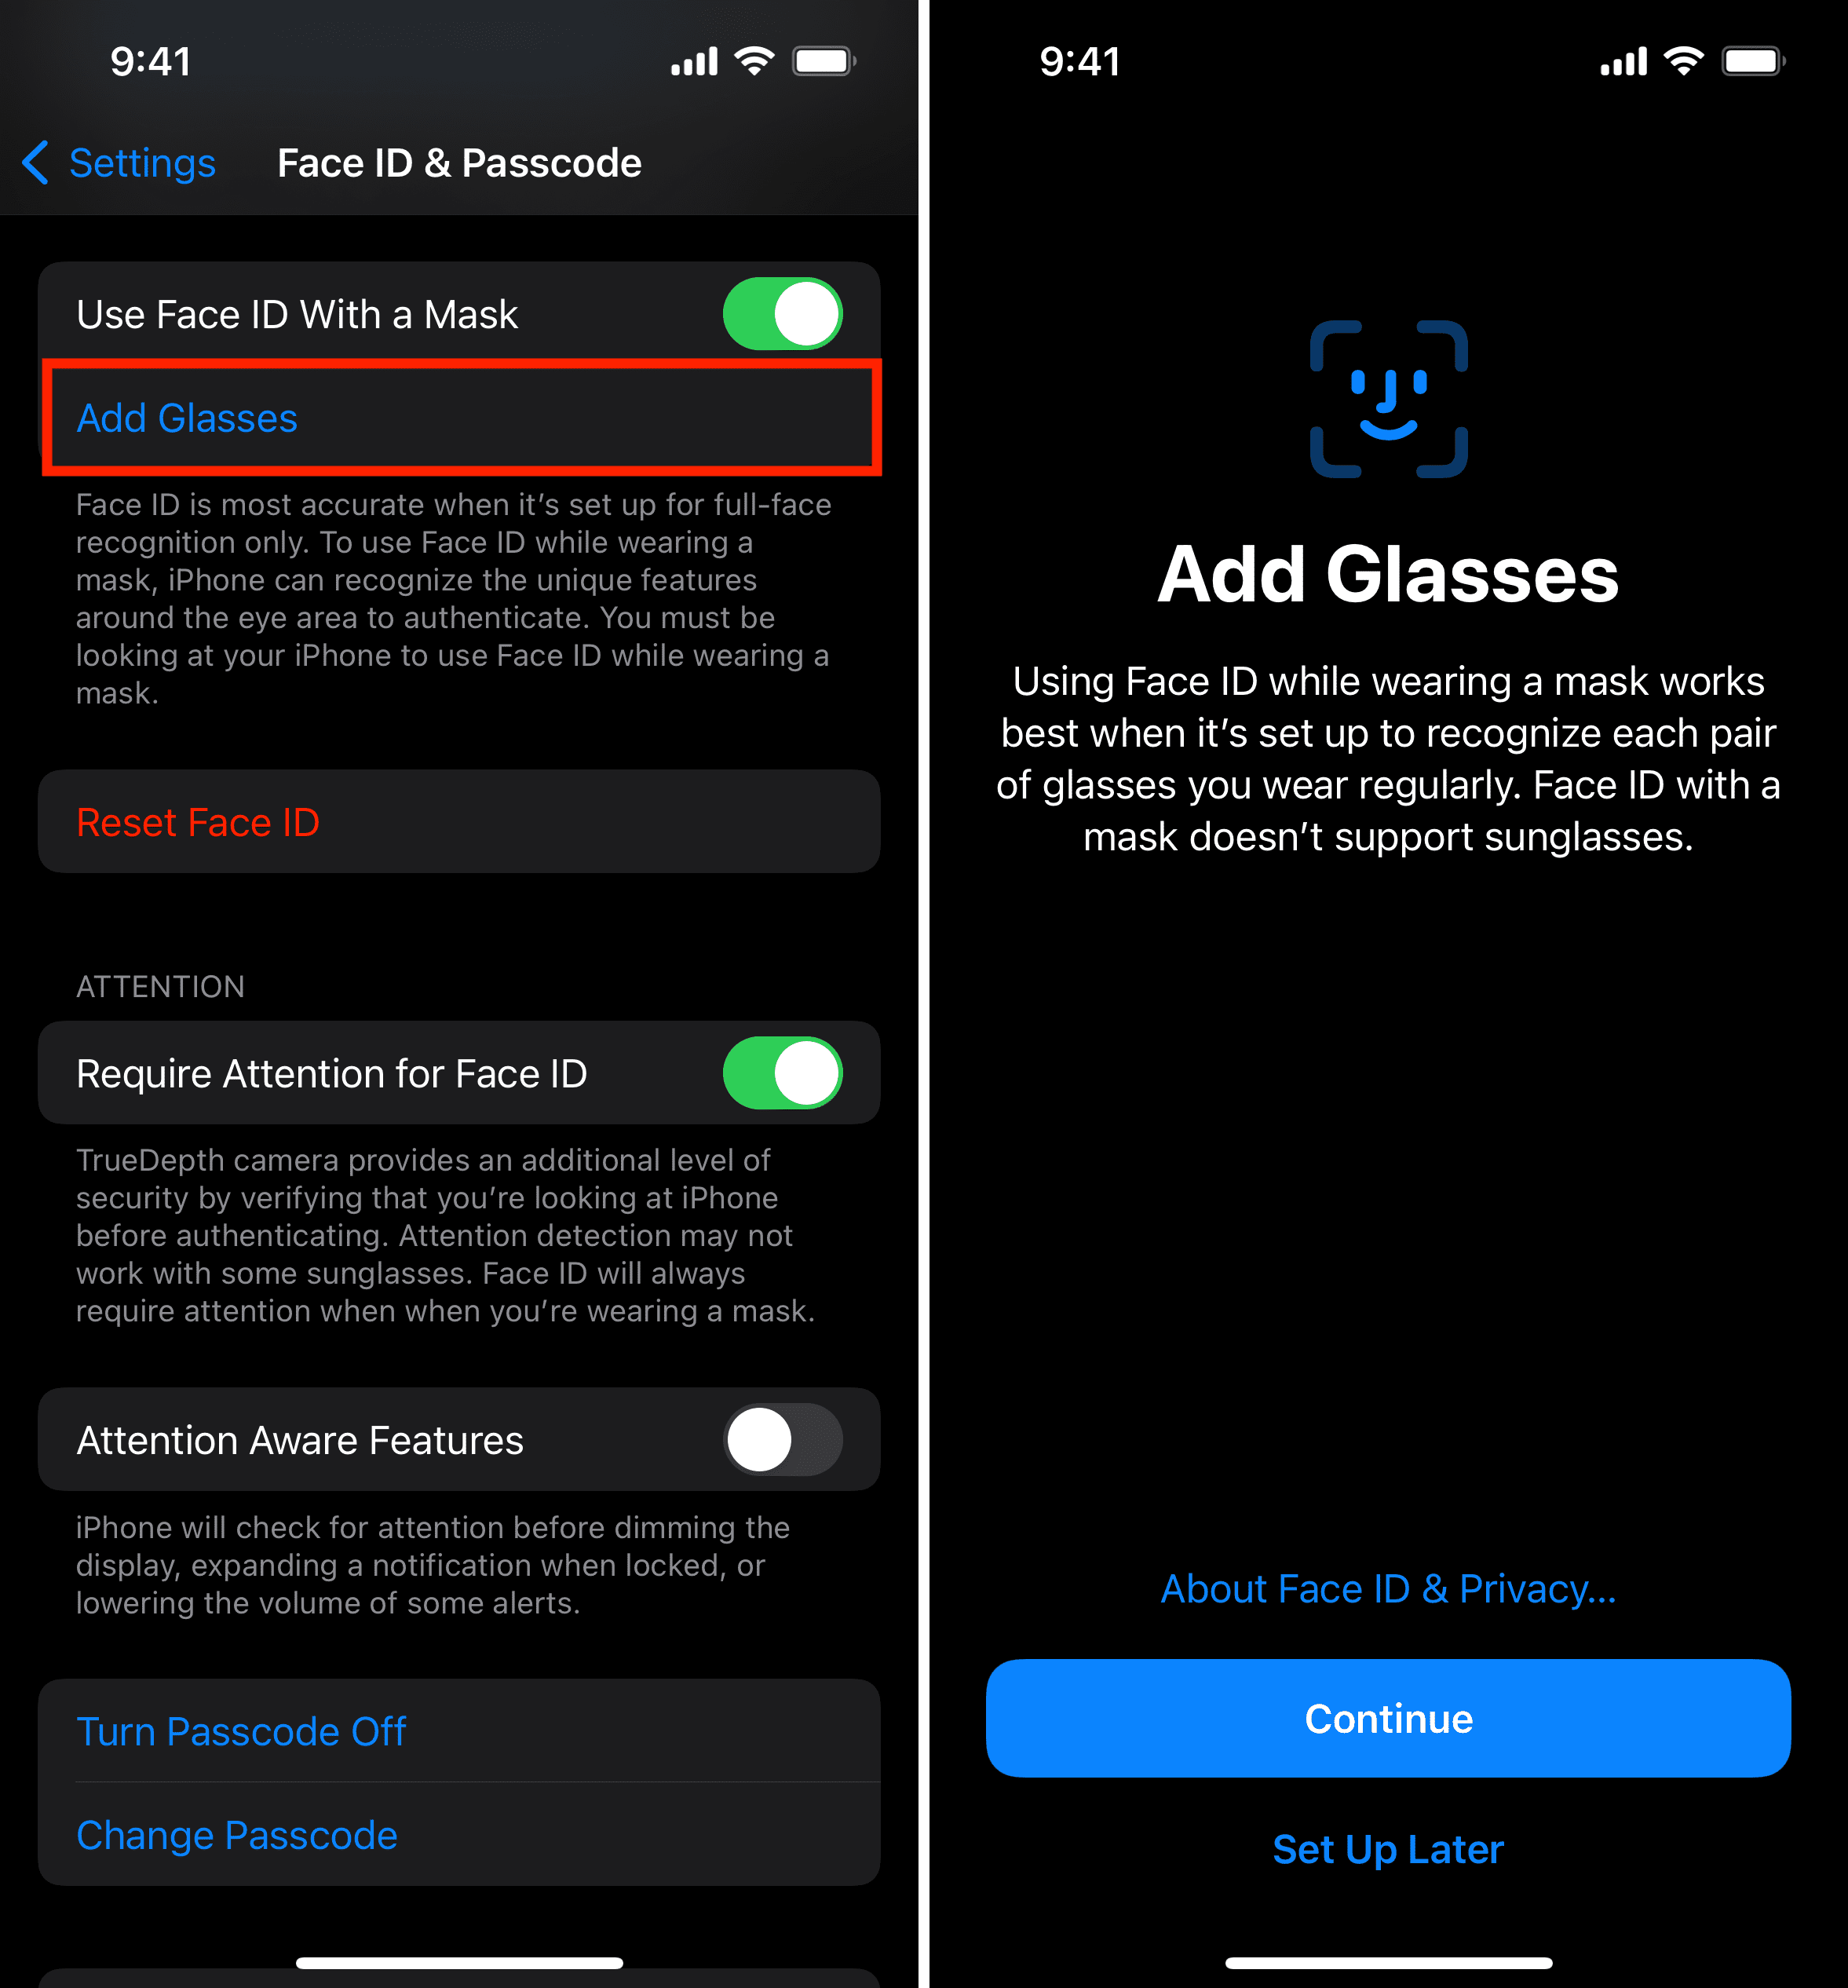 Add Glasses to Face ID with a mask